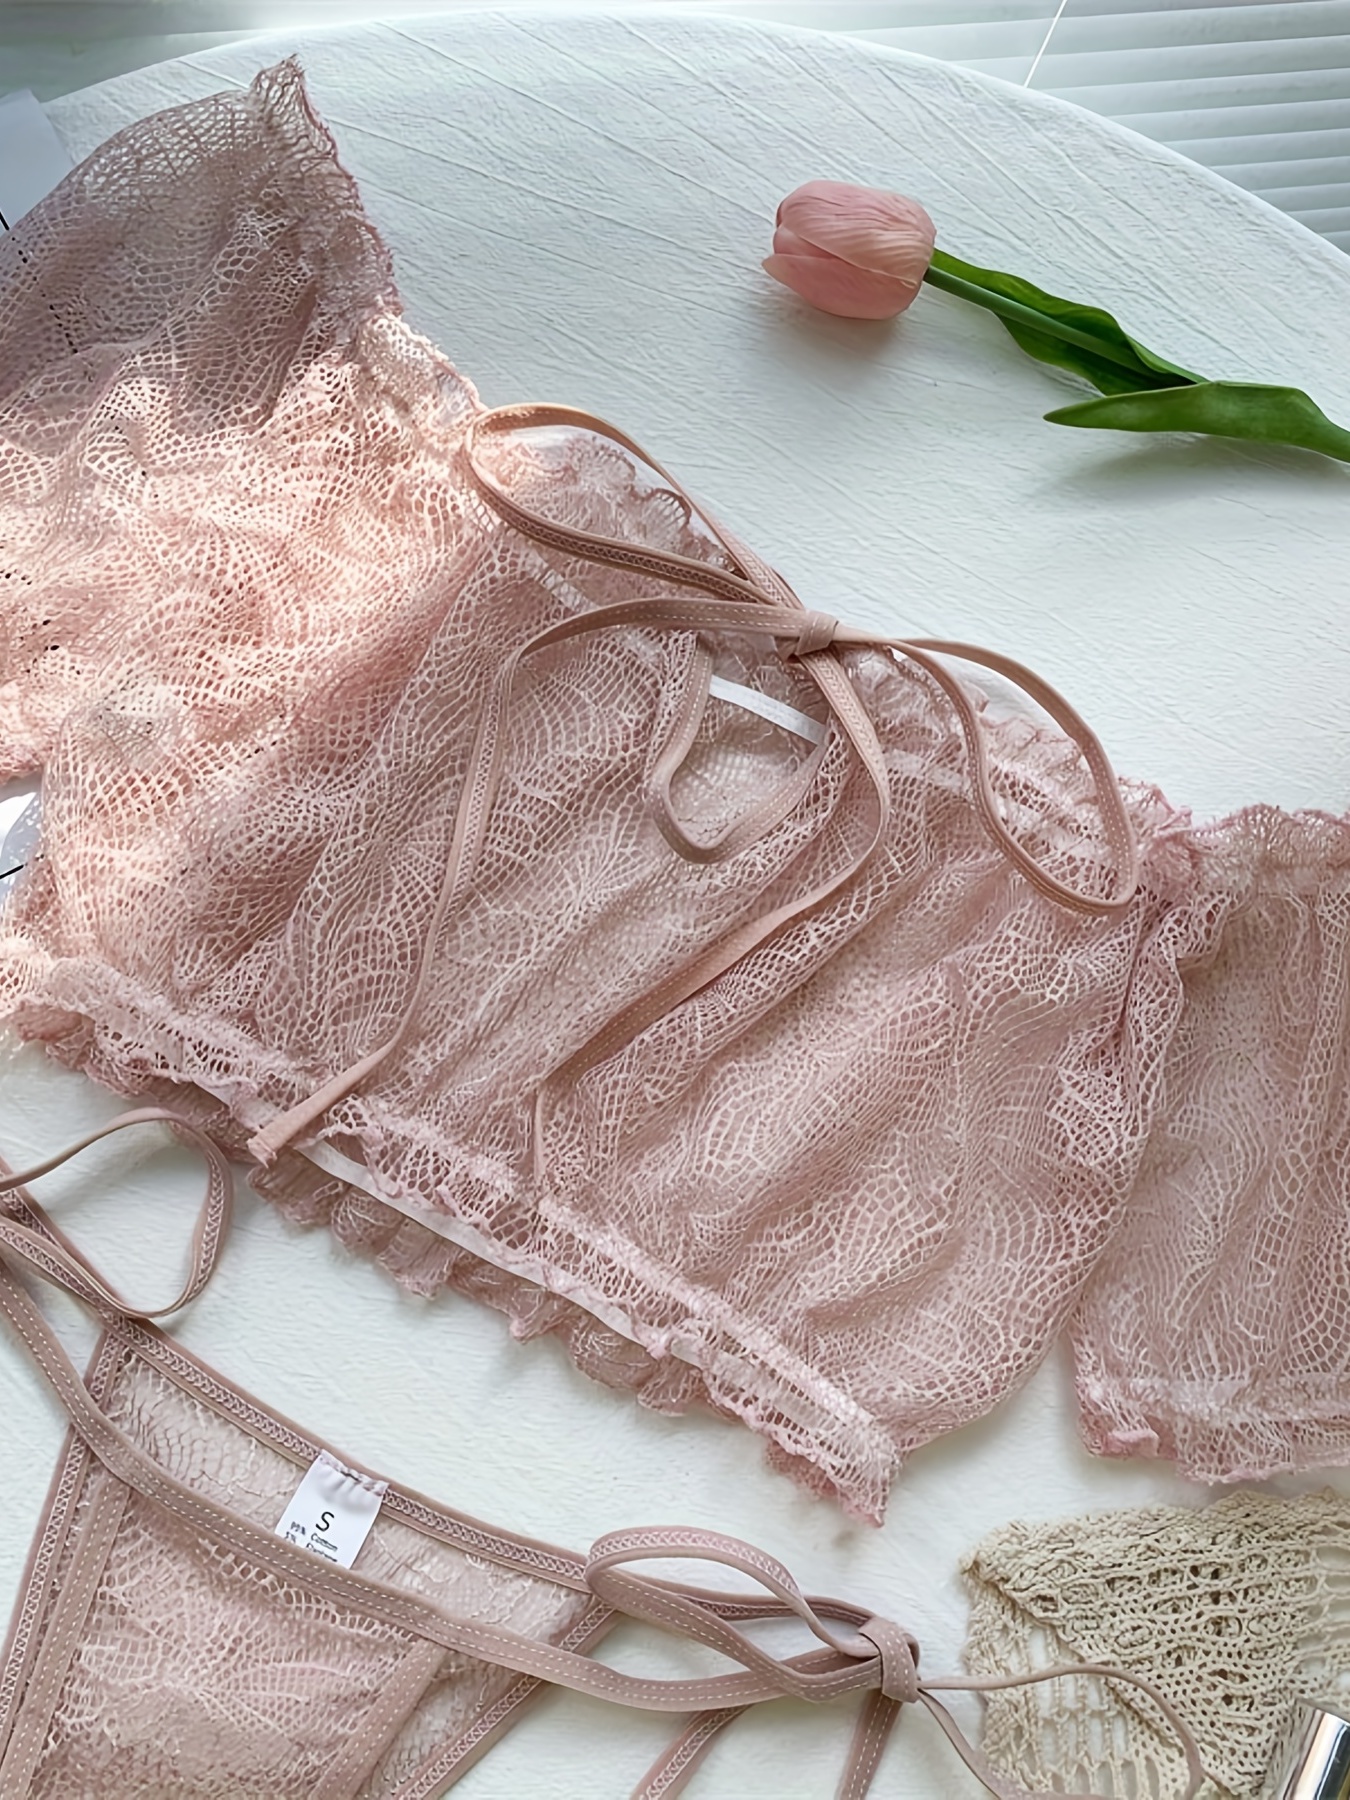 Pinky Lace Up Frilly Knickers and Bra Set